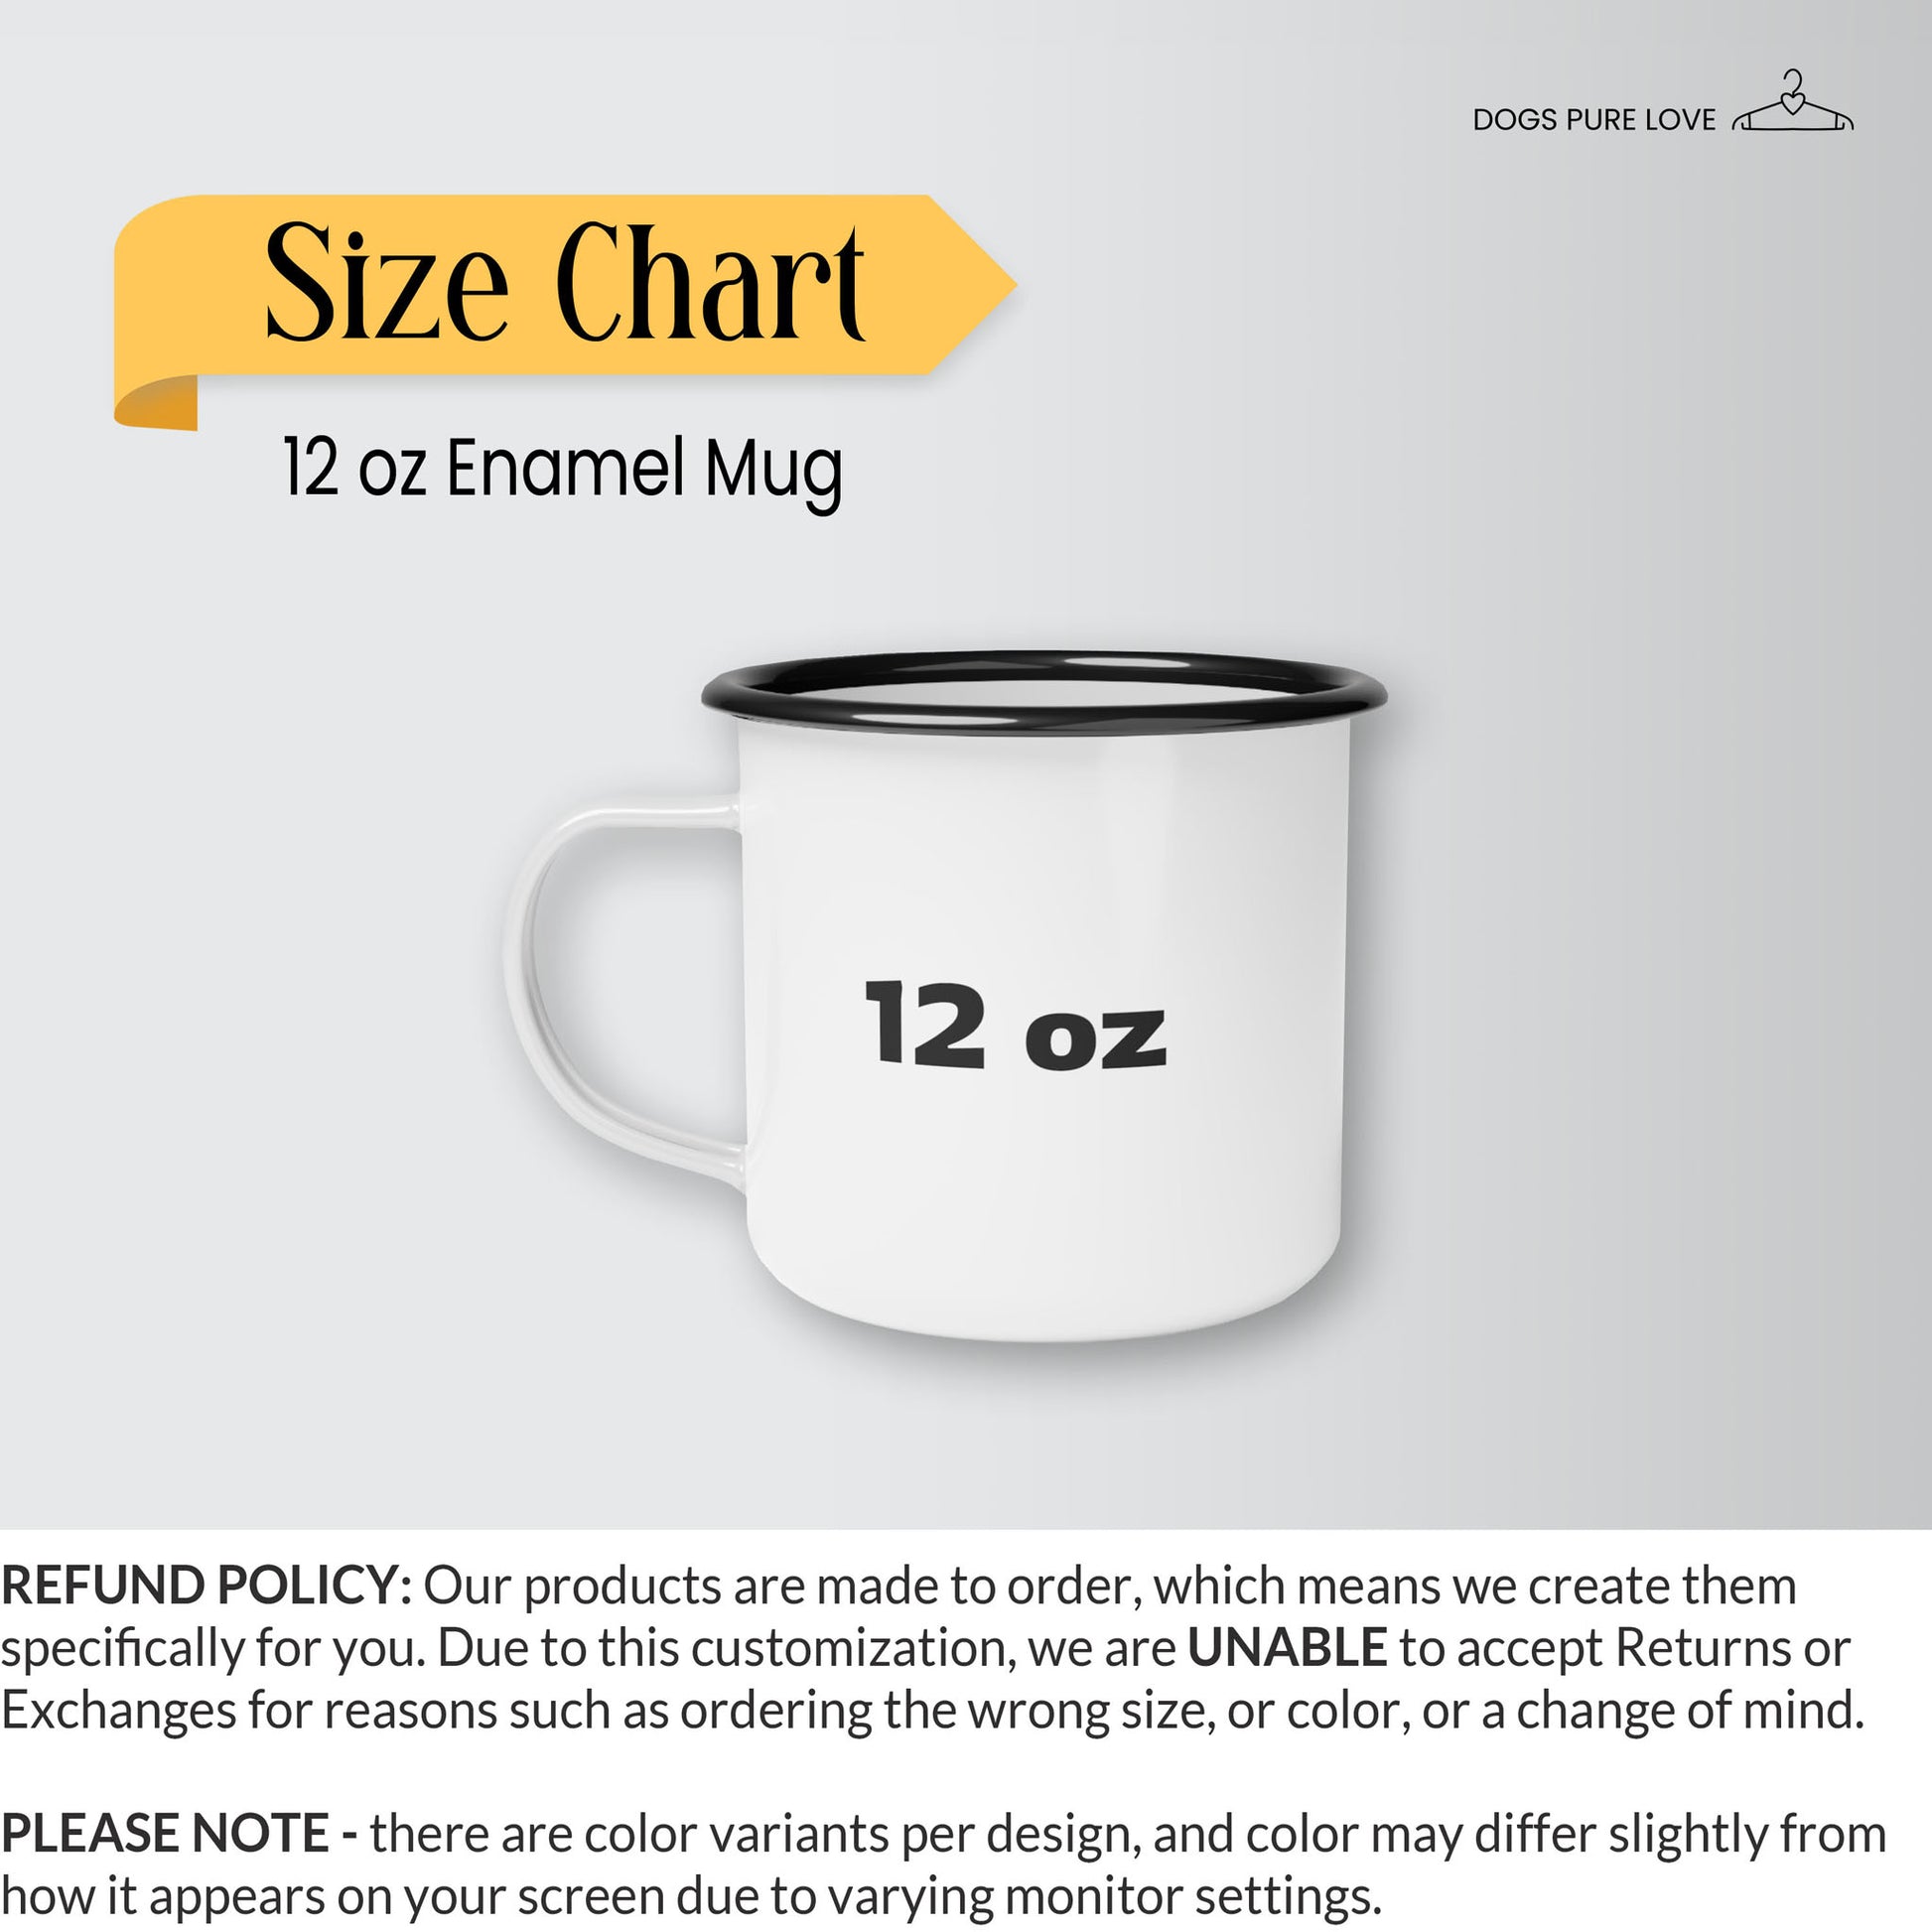 12 oz enamel mug size chart and a brief description of Dogs Pure Love Refund Policy.